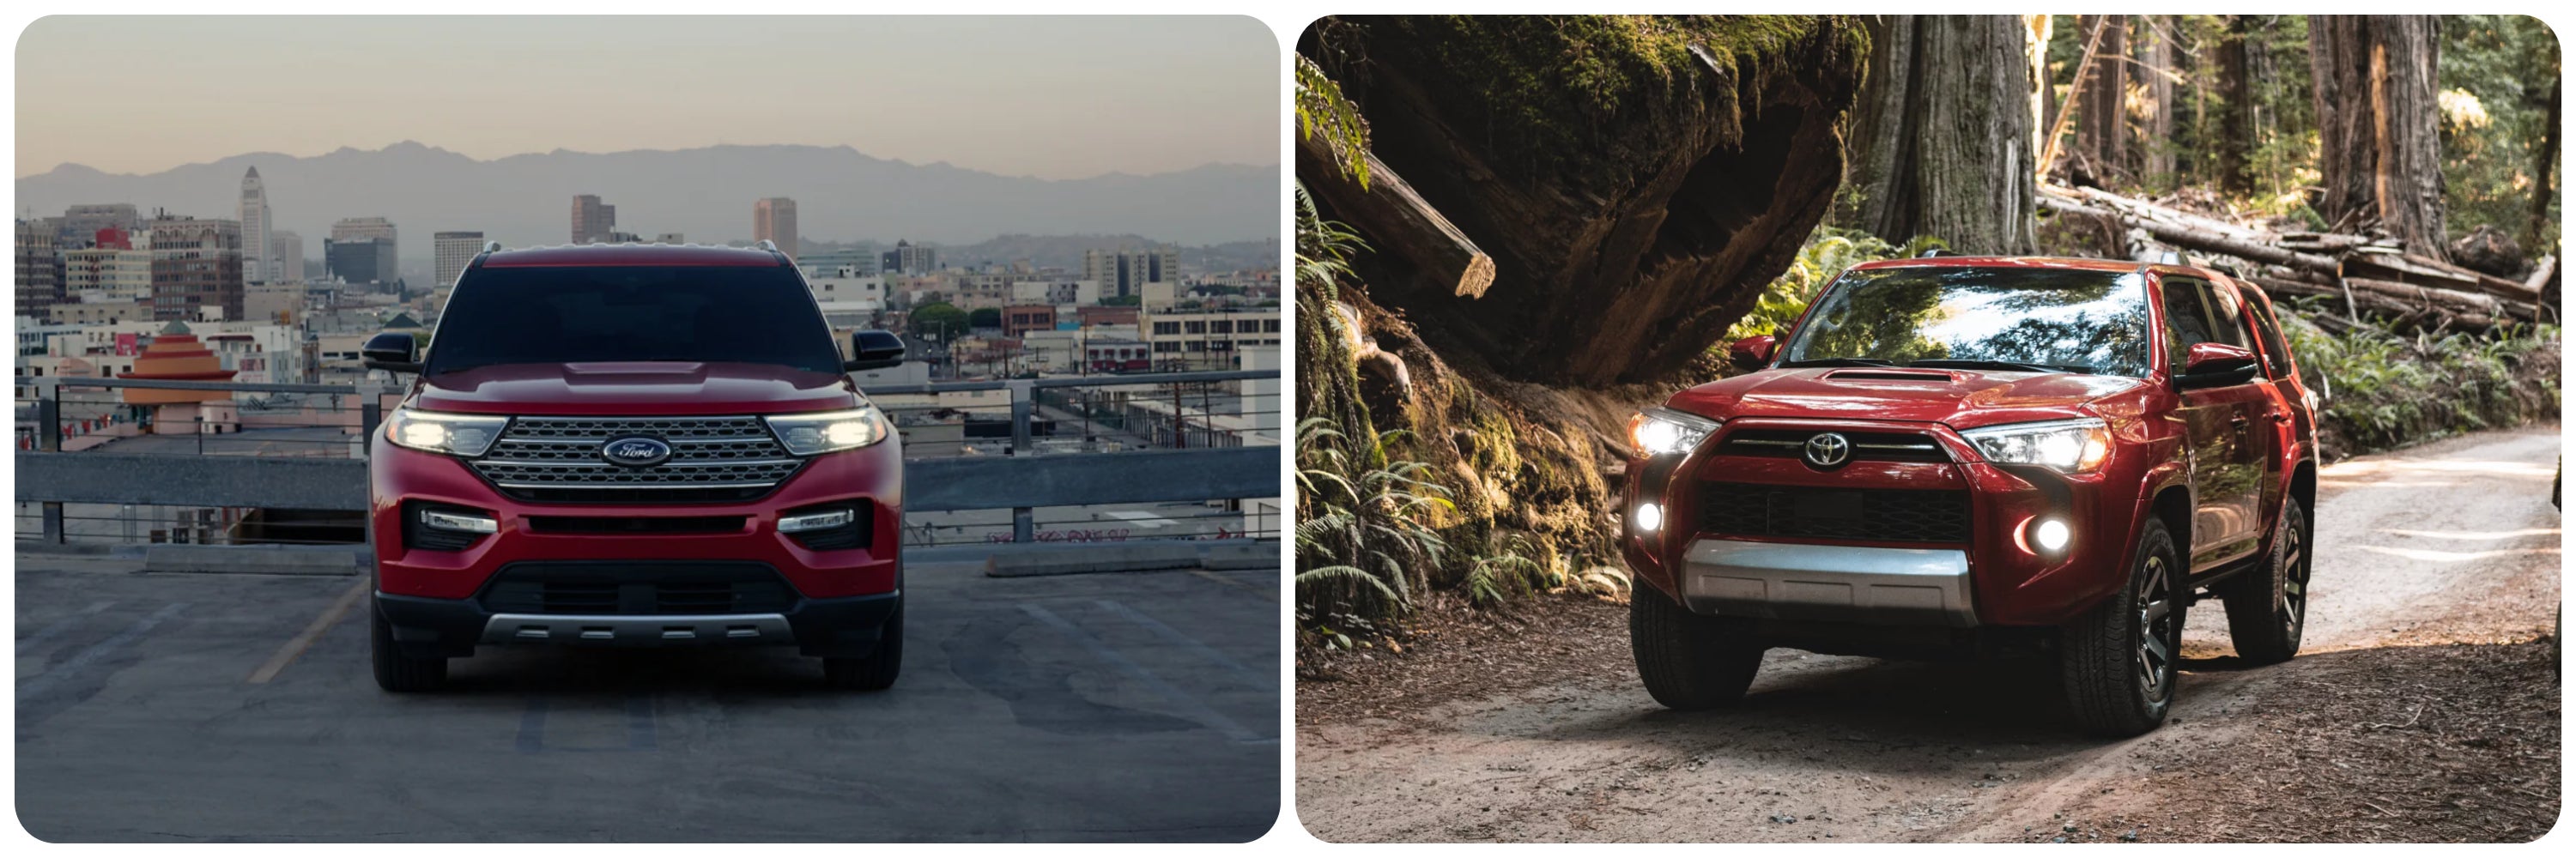 On the right a view of the front of a red 2022 Ford Explorer as it sits parked in front of a cityscape. On the right a view of a red 2022 Toyota 4Runner as it drives through Redwood National Forest